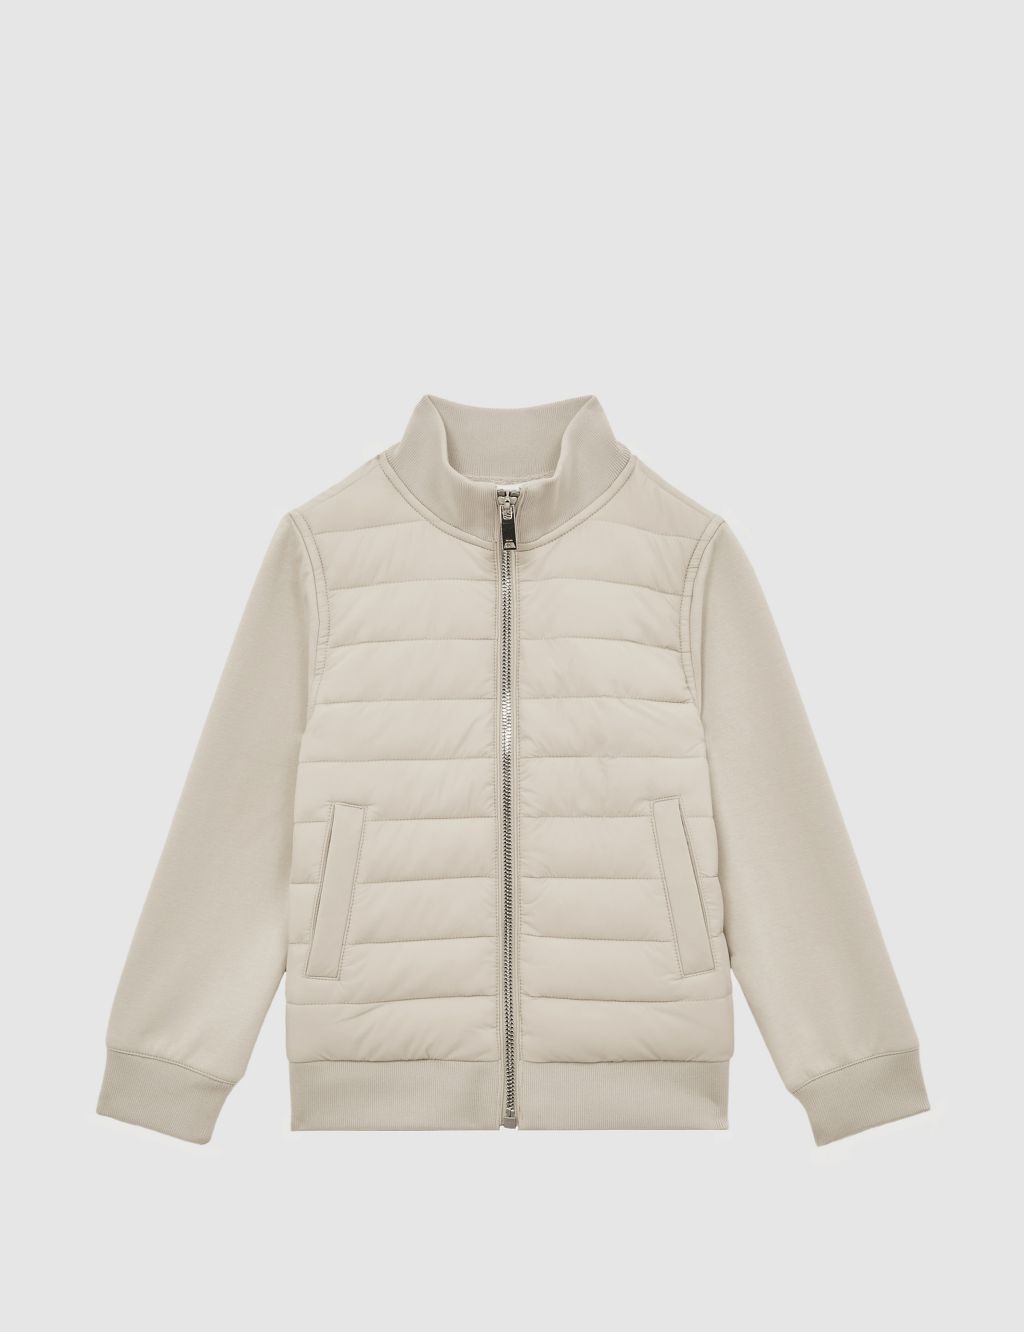 Cotton Blend Quilted Jacket (3-14 Yrs) image 2